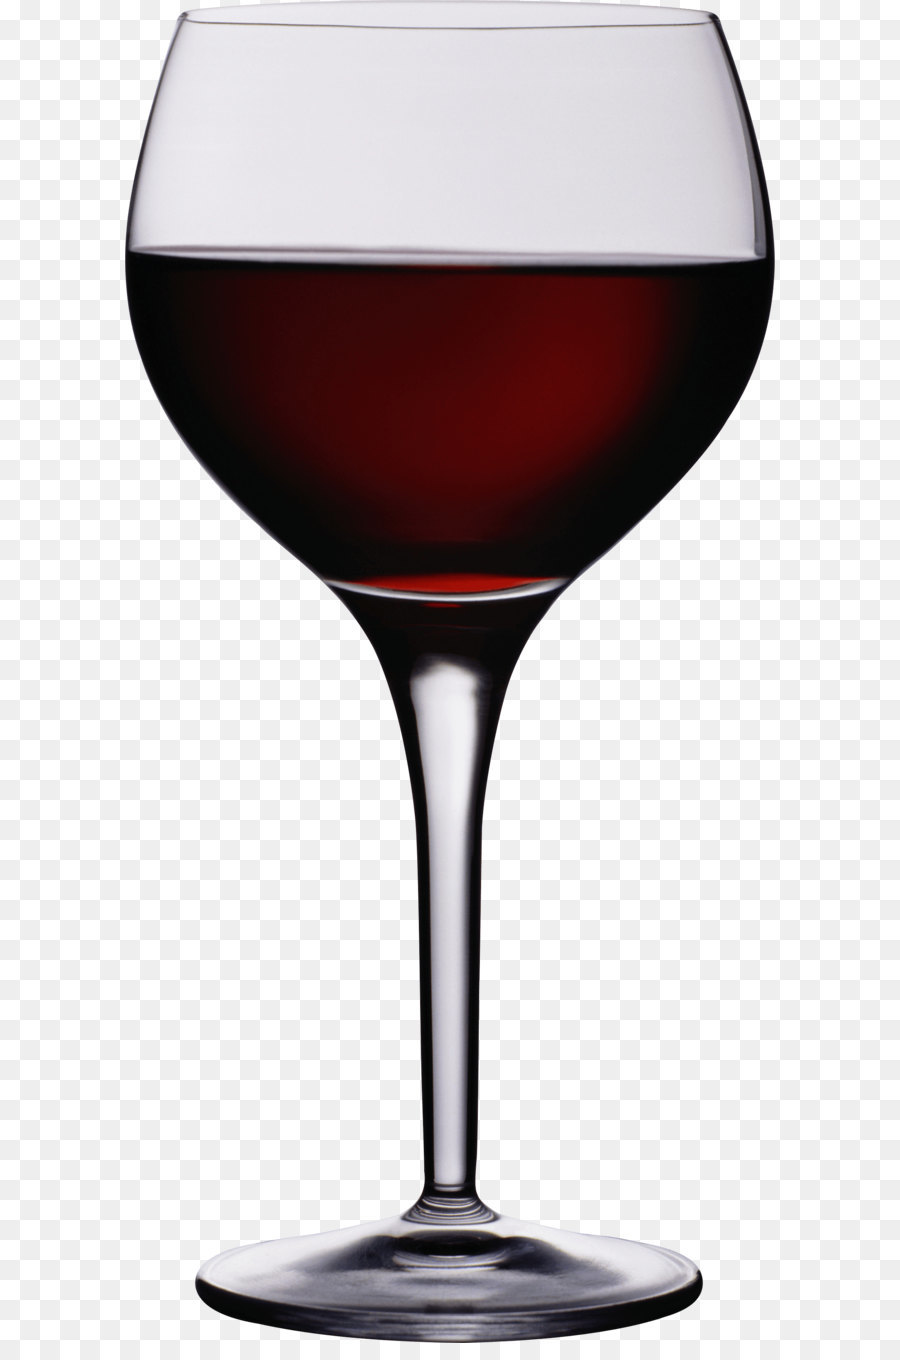 Red Wine Merlot Cabernet Sauvignon Port wine - Glass Png Image png download - 1588*3280 - Free Transparent Red Wine png Download.